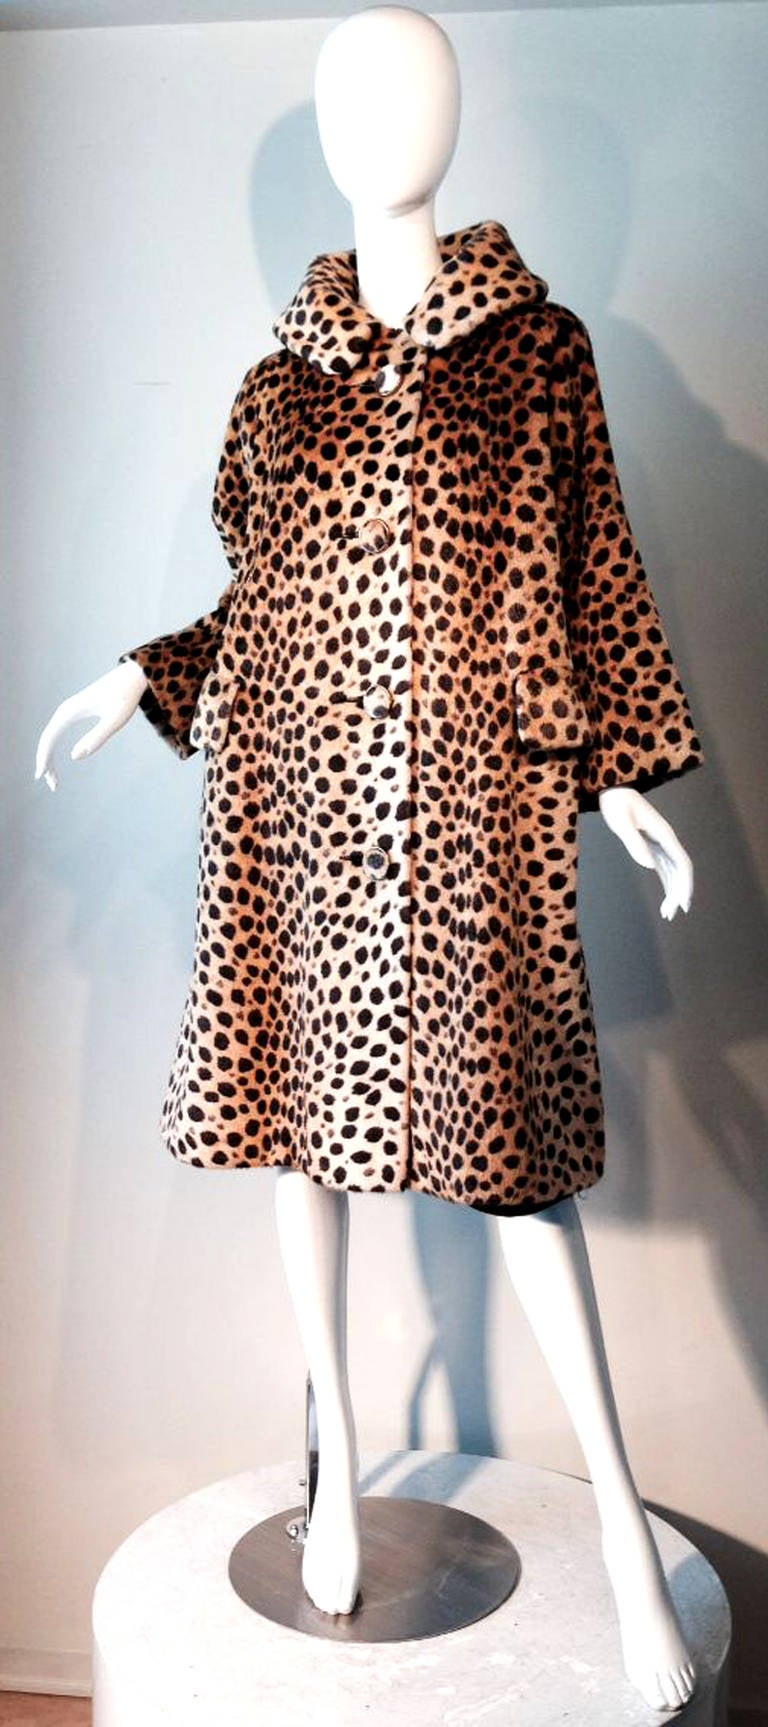 A fine and rare vintage Dan Millstein faux leopard fur coat. Exquisite printed faux fur item fully lined with matching fabric covered button front closures, large stand-up collar and side pockets (one size fits S/M/L). Pristine.